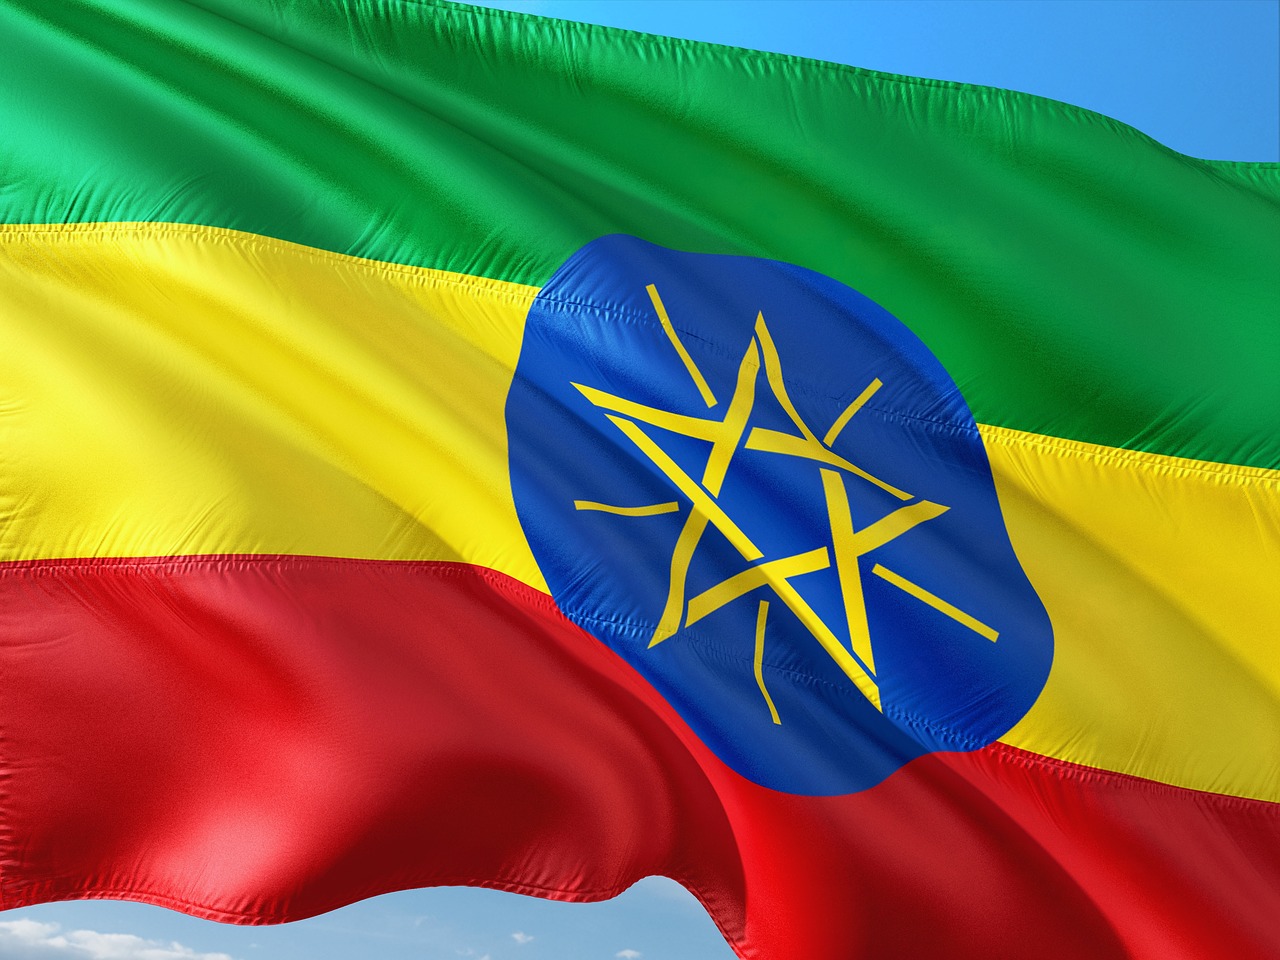 Ethiopia must be held accountable for war crimes against medical workers and patients: Human Rights Watch